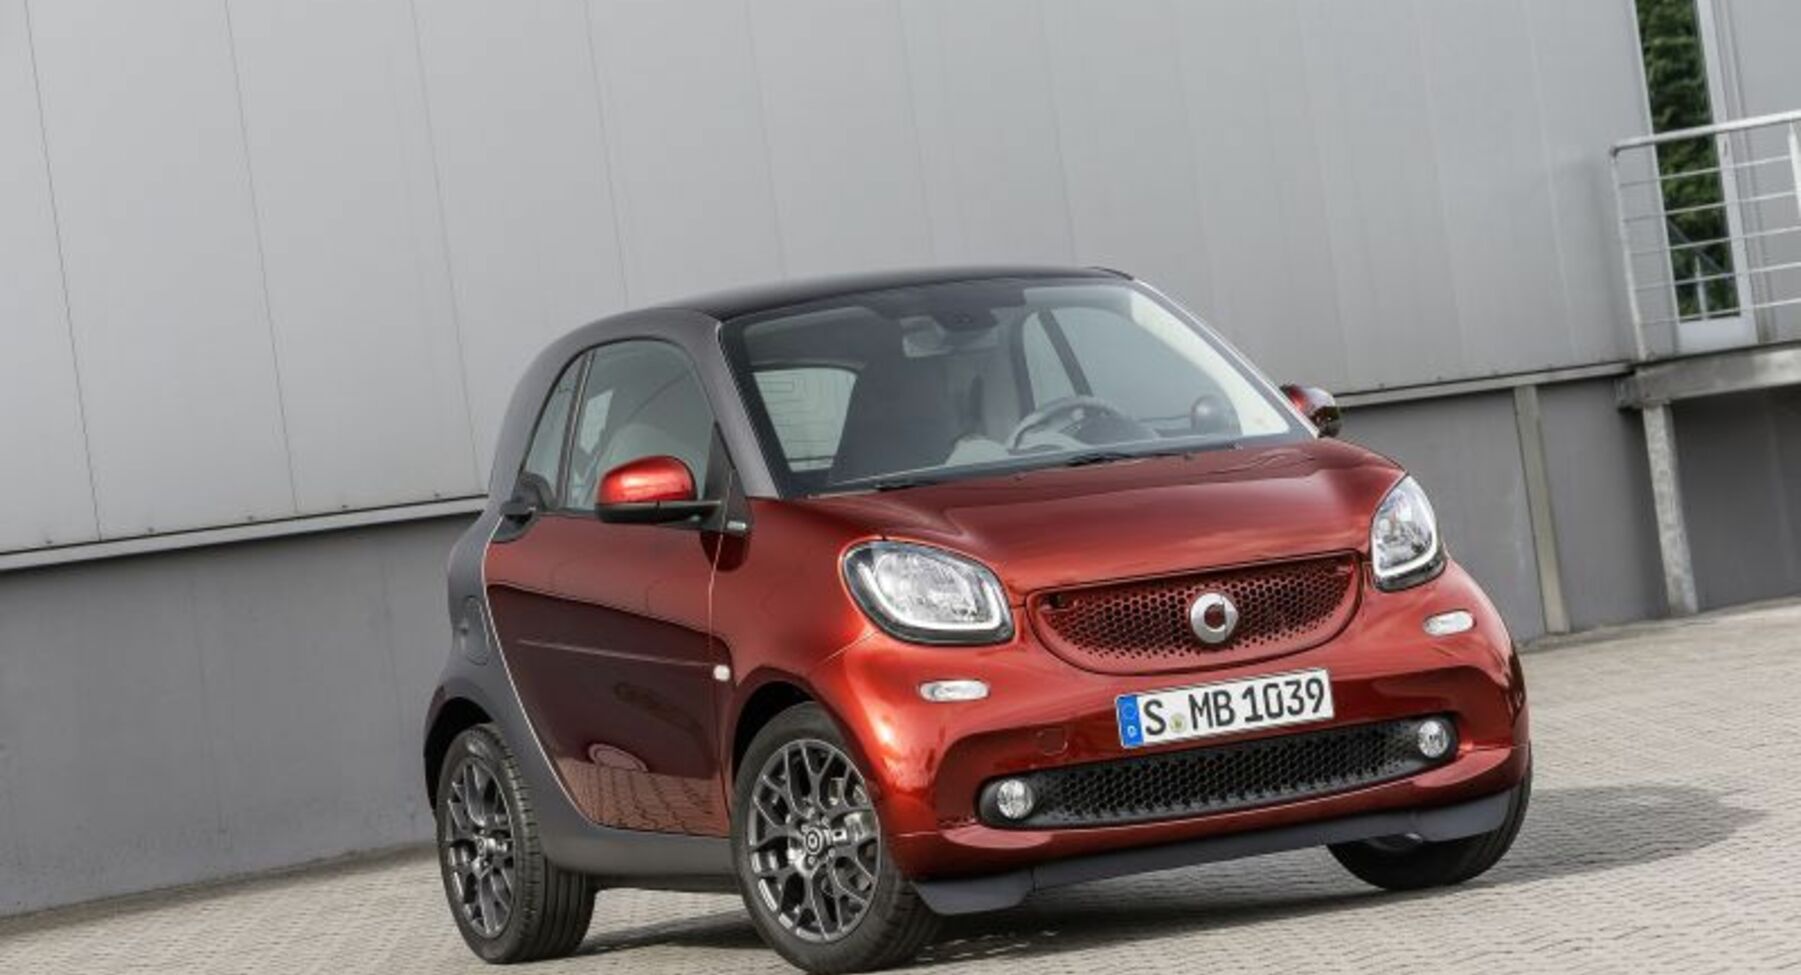 Smart Fortwo III coupe (C453) 0.9 (90 Hp) Automatic 2014, 2015, 2016, 2017, 2018, 2019 